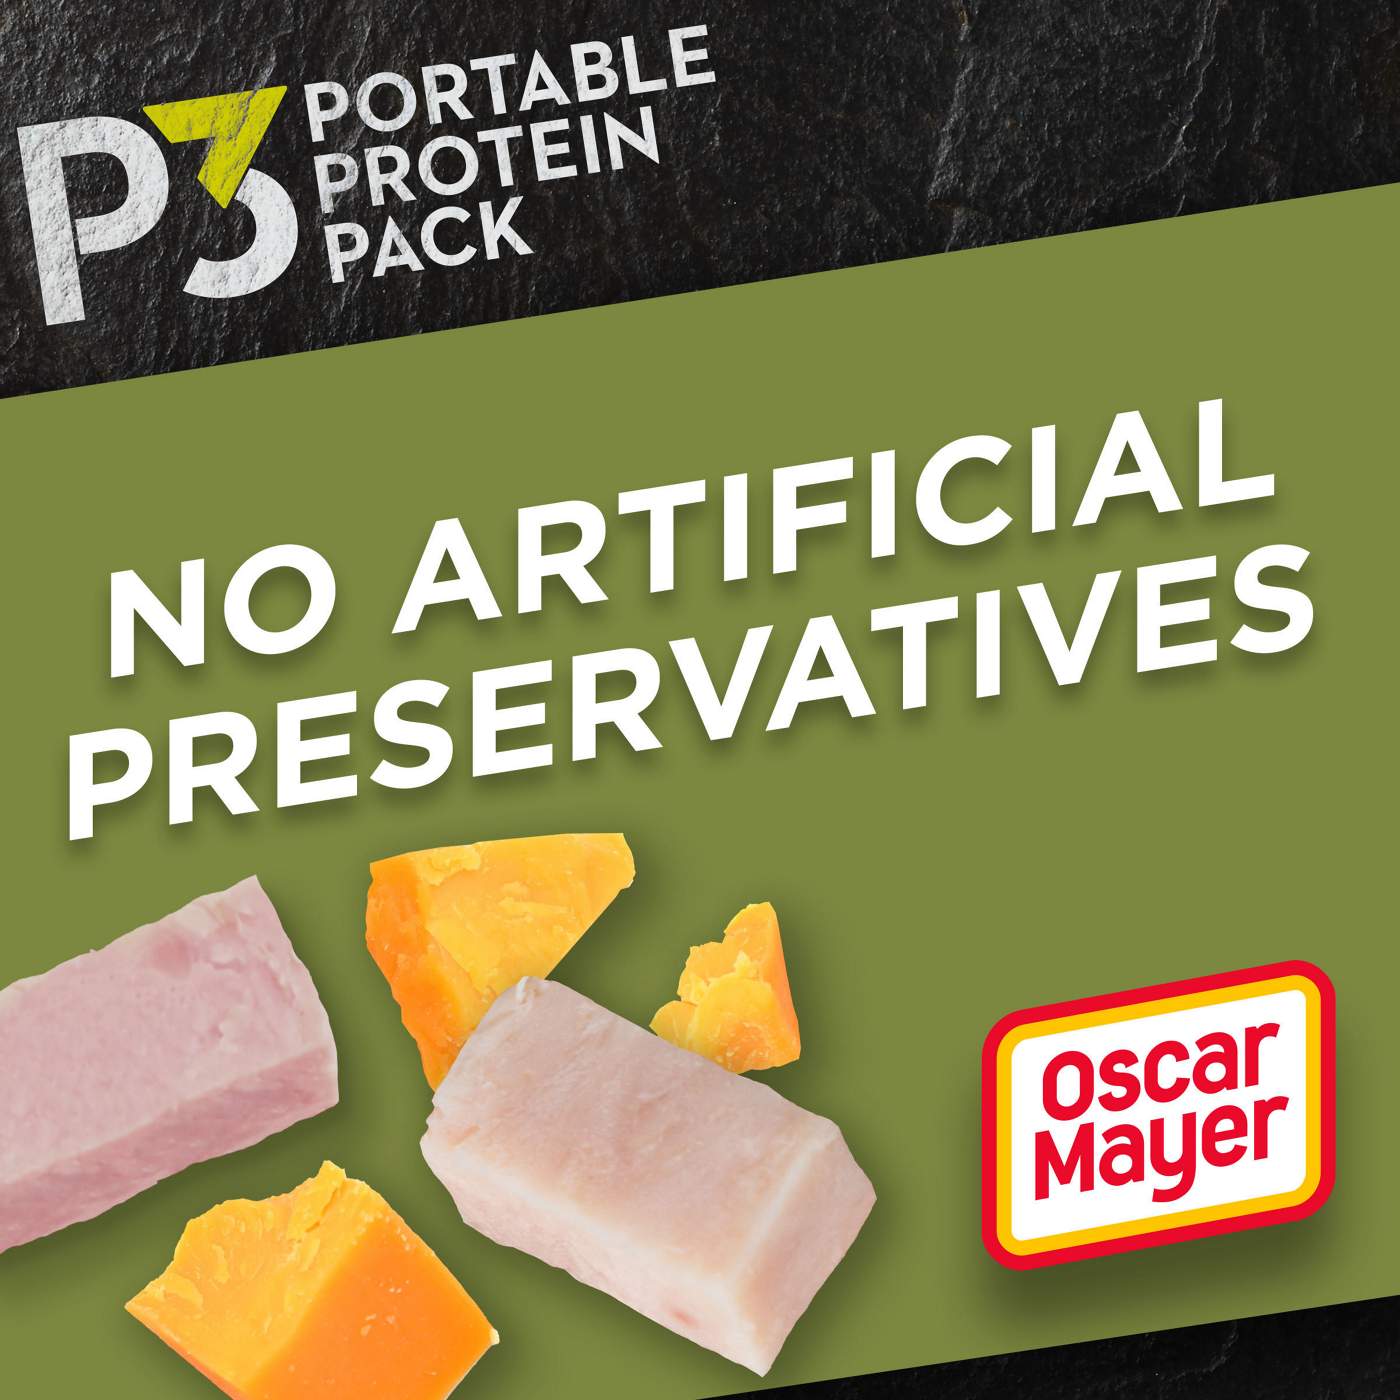 P3 Portable Protein Pack Snack Tray - Turkey, Ham & Cheddar; image 2 of 3